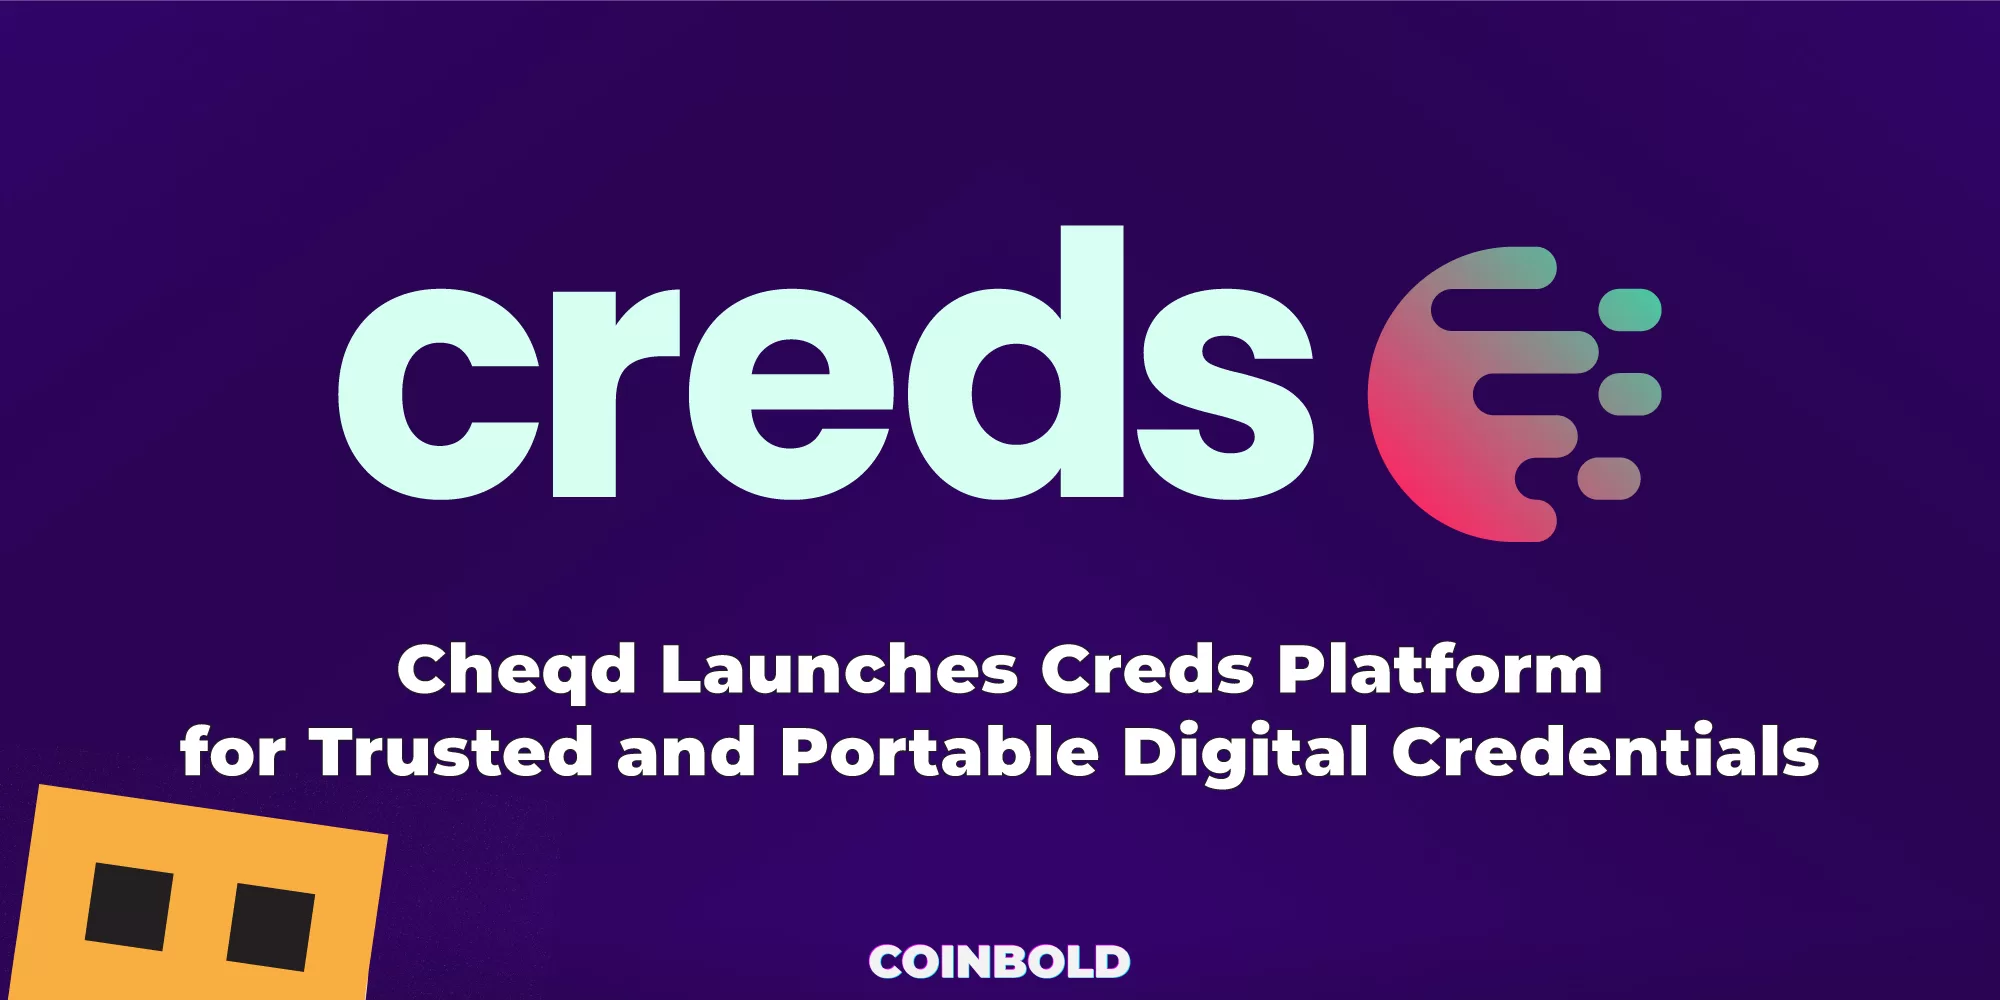 Cheqd Launches Creds Platform for Trusted and Portable Digital Credentials jpg.webp